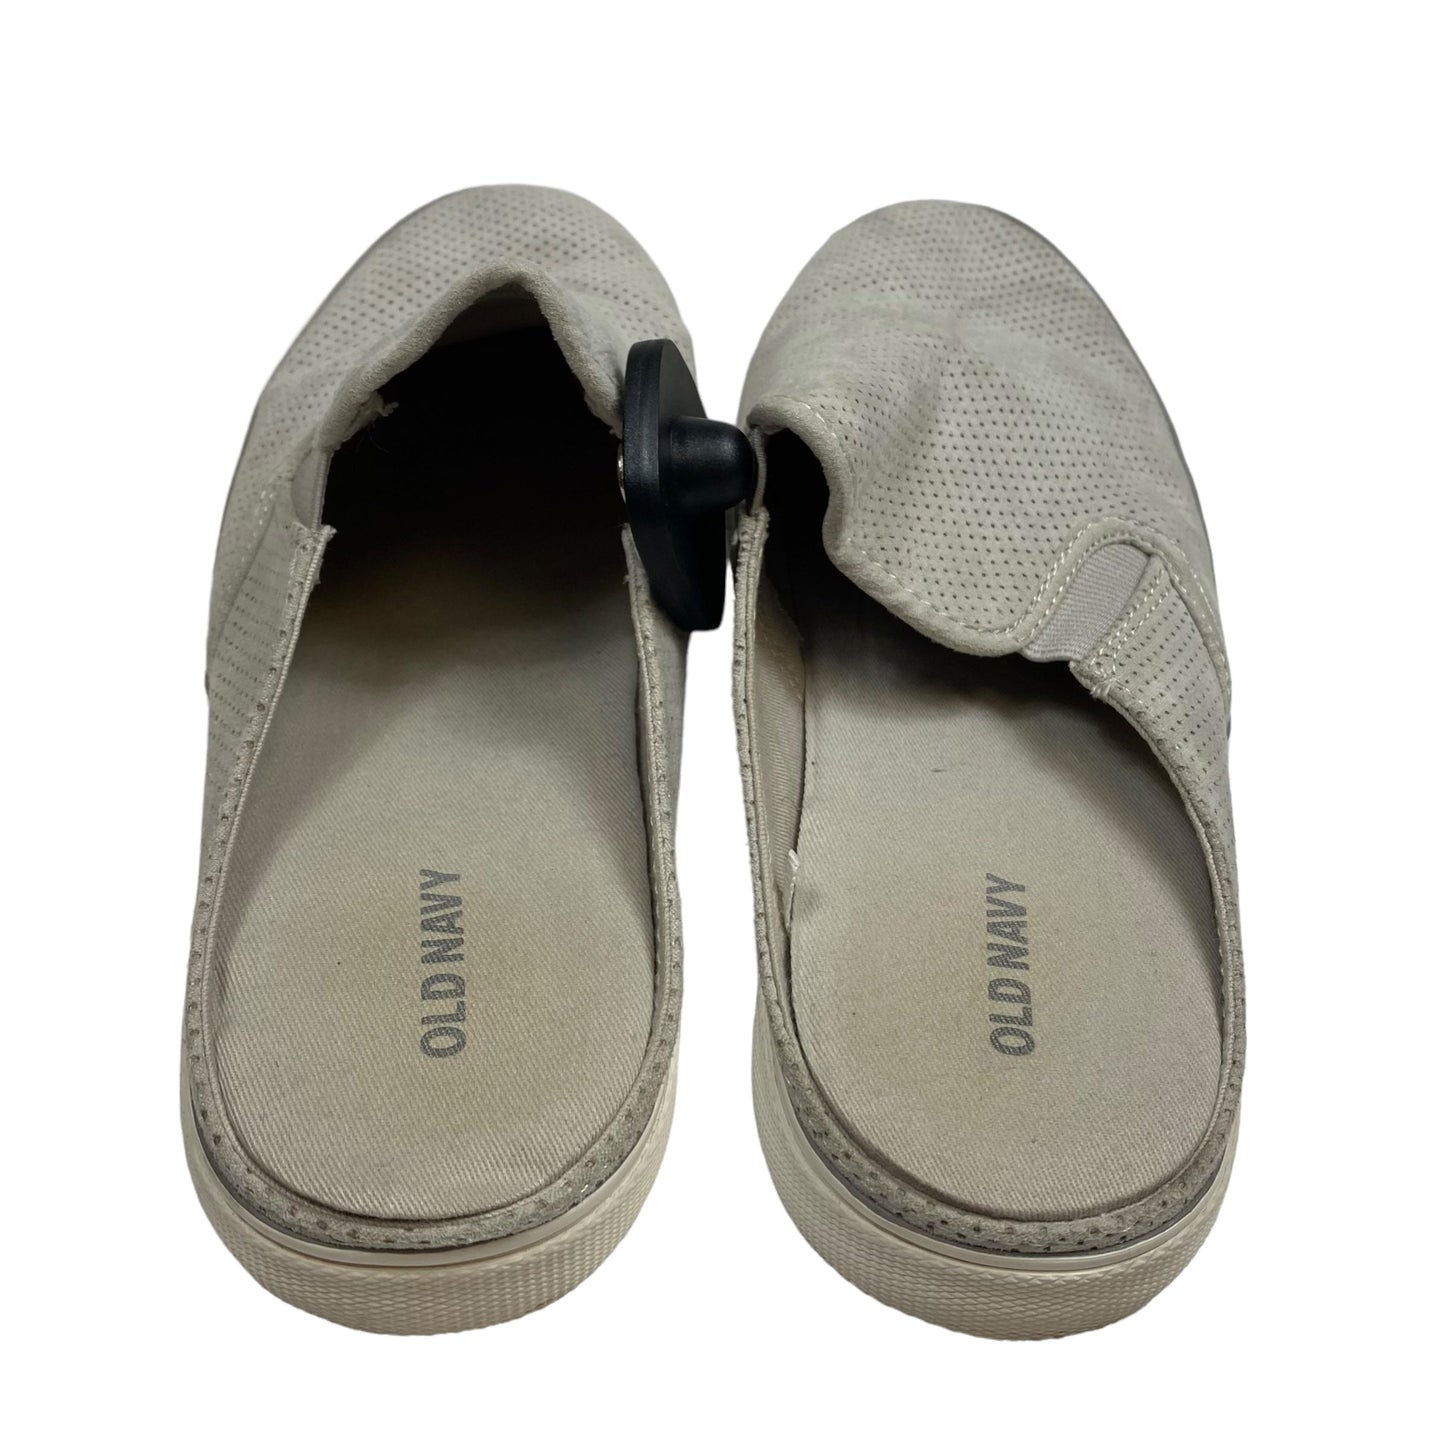 Grey Shoes Flats Old Navy, Size 8